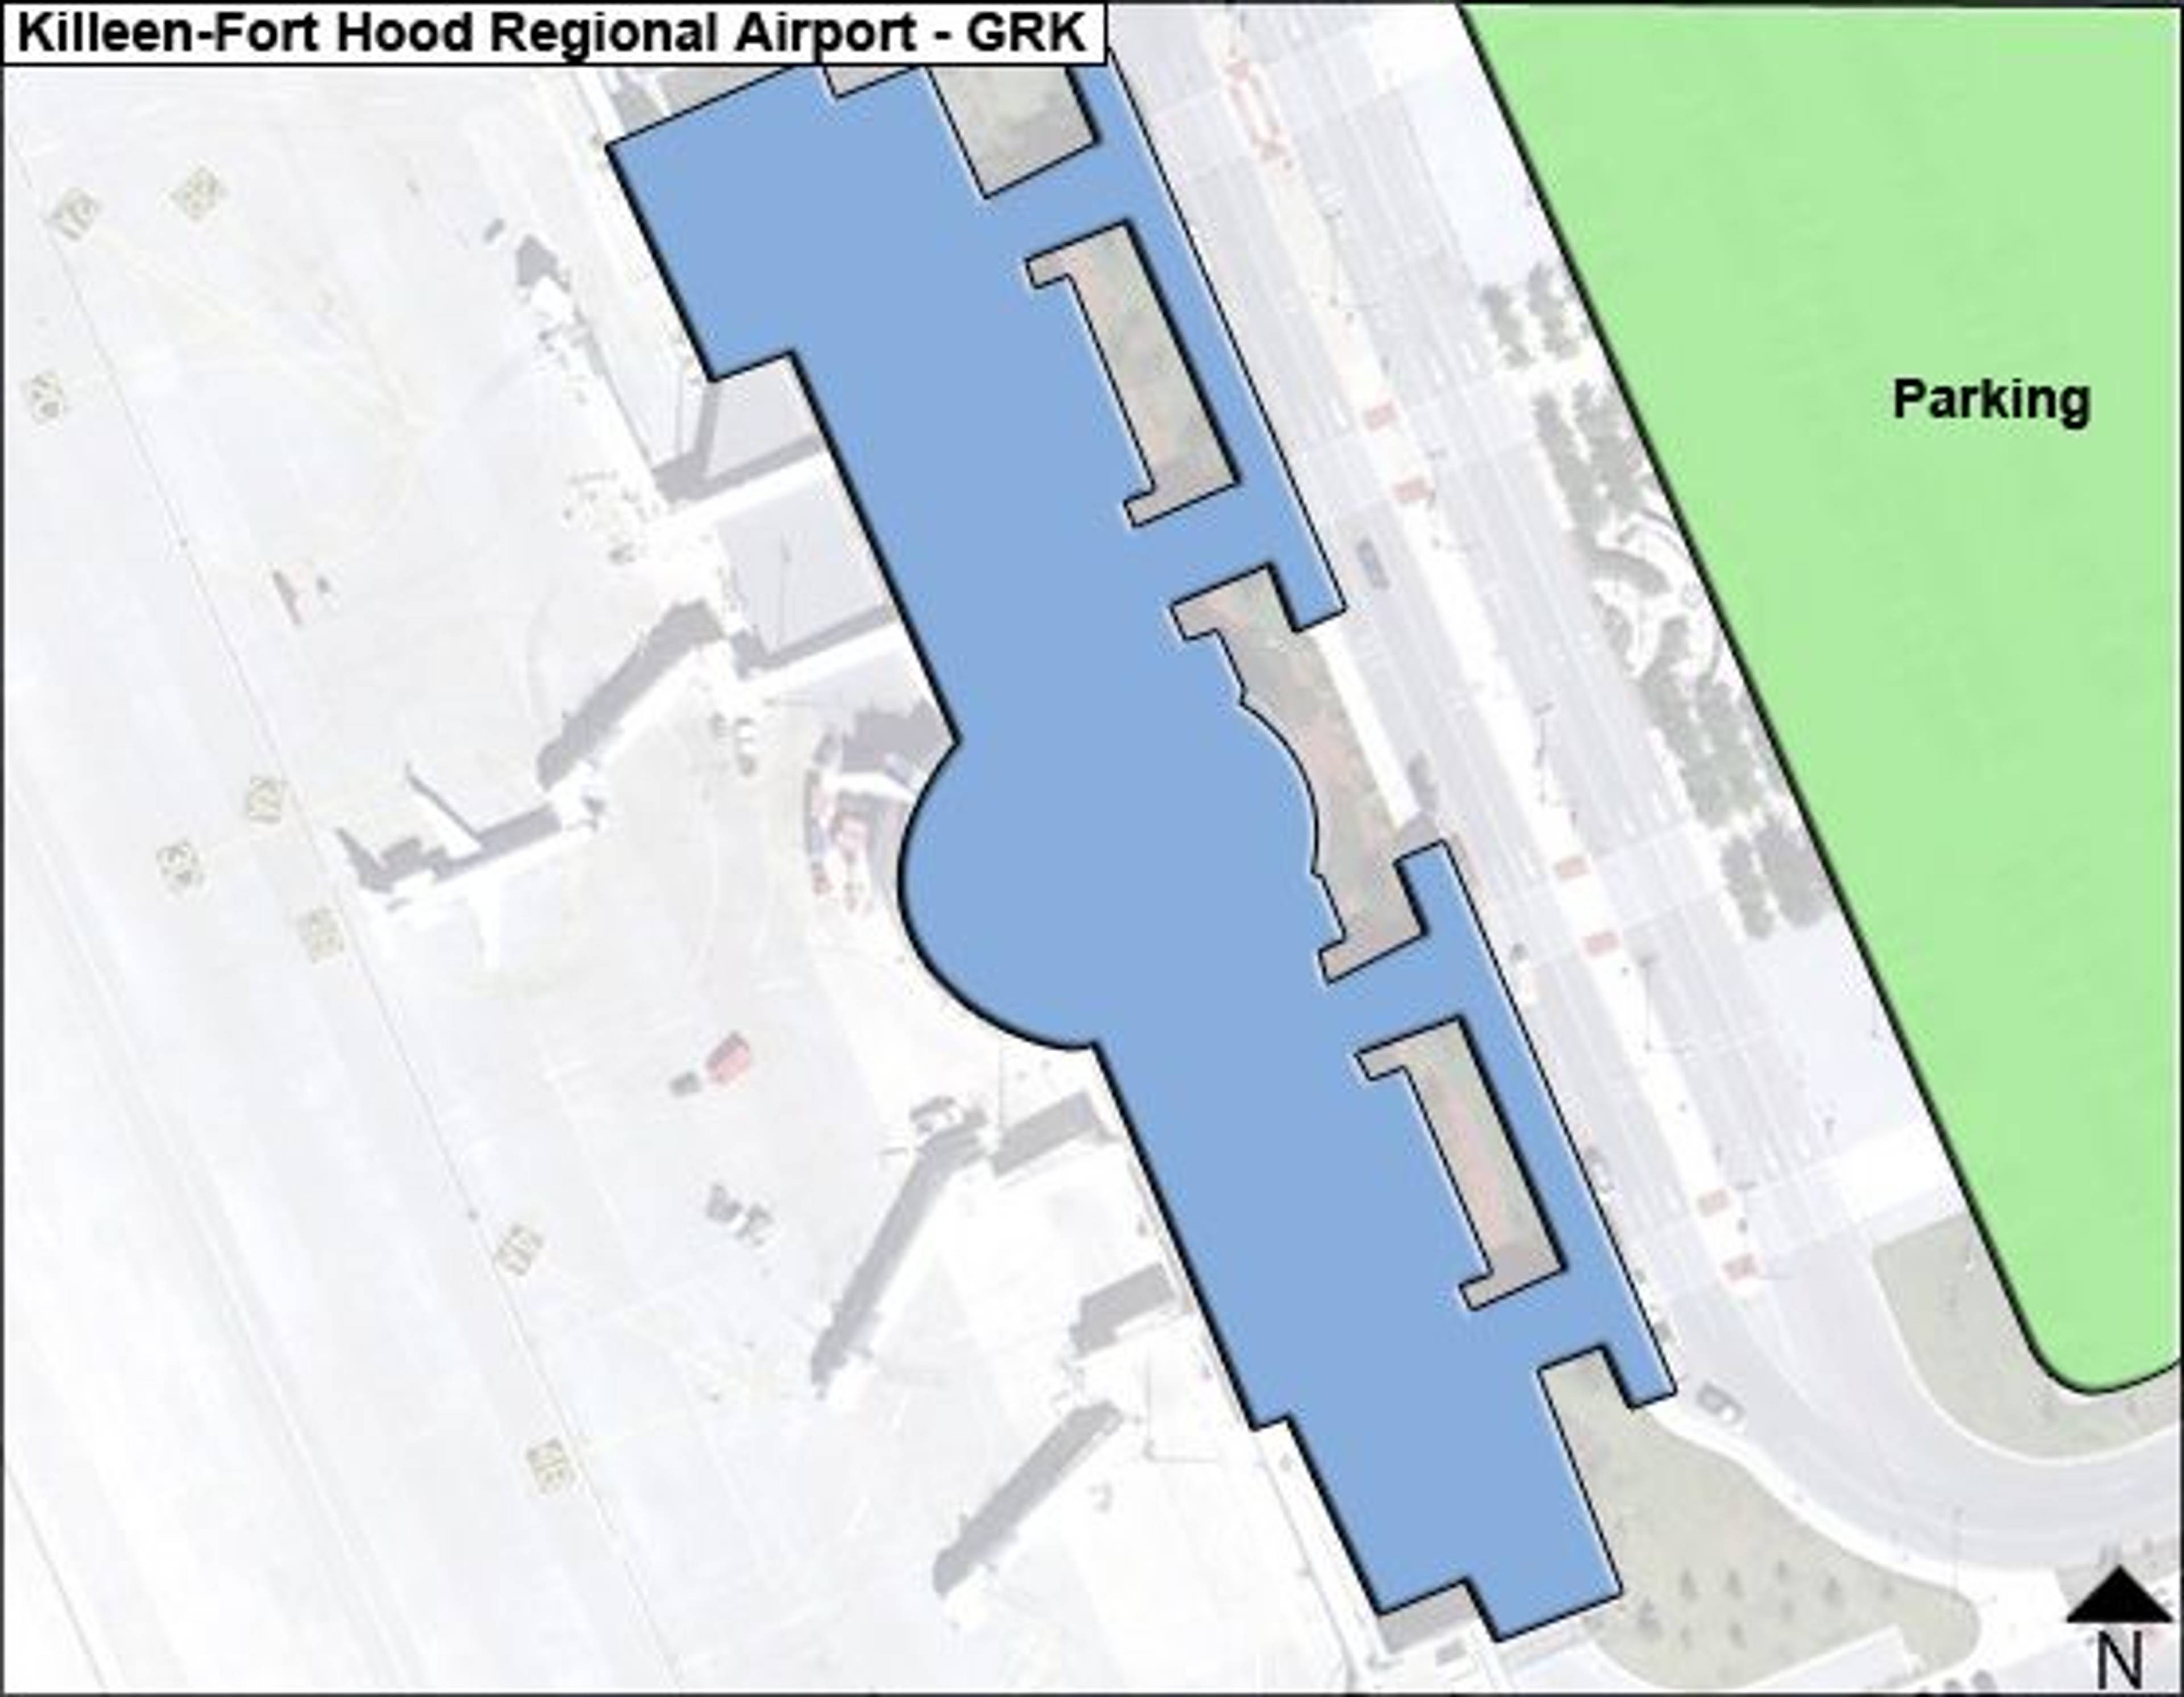 Killeen Airport Overview Map